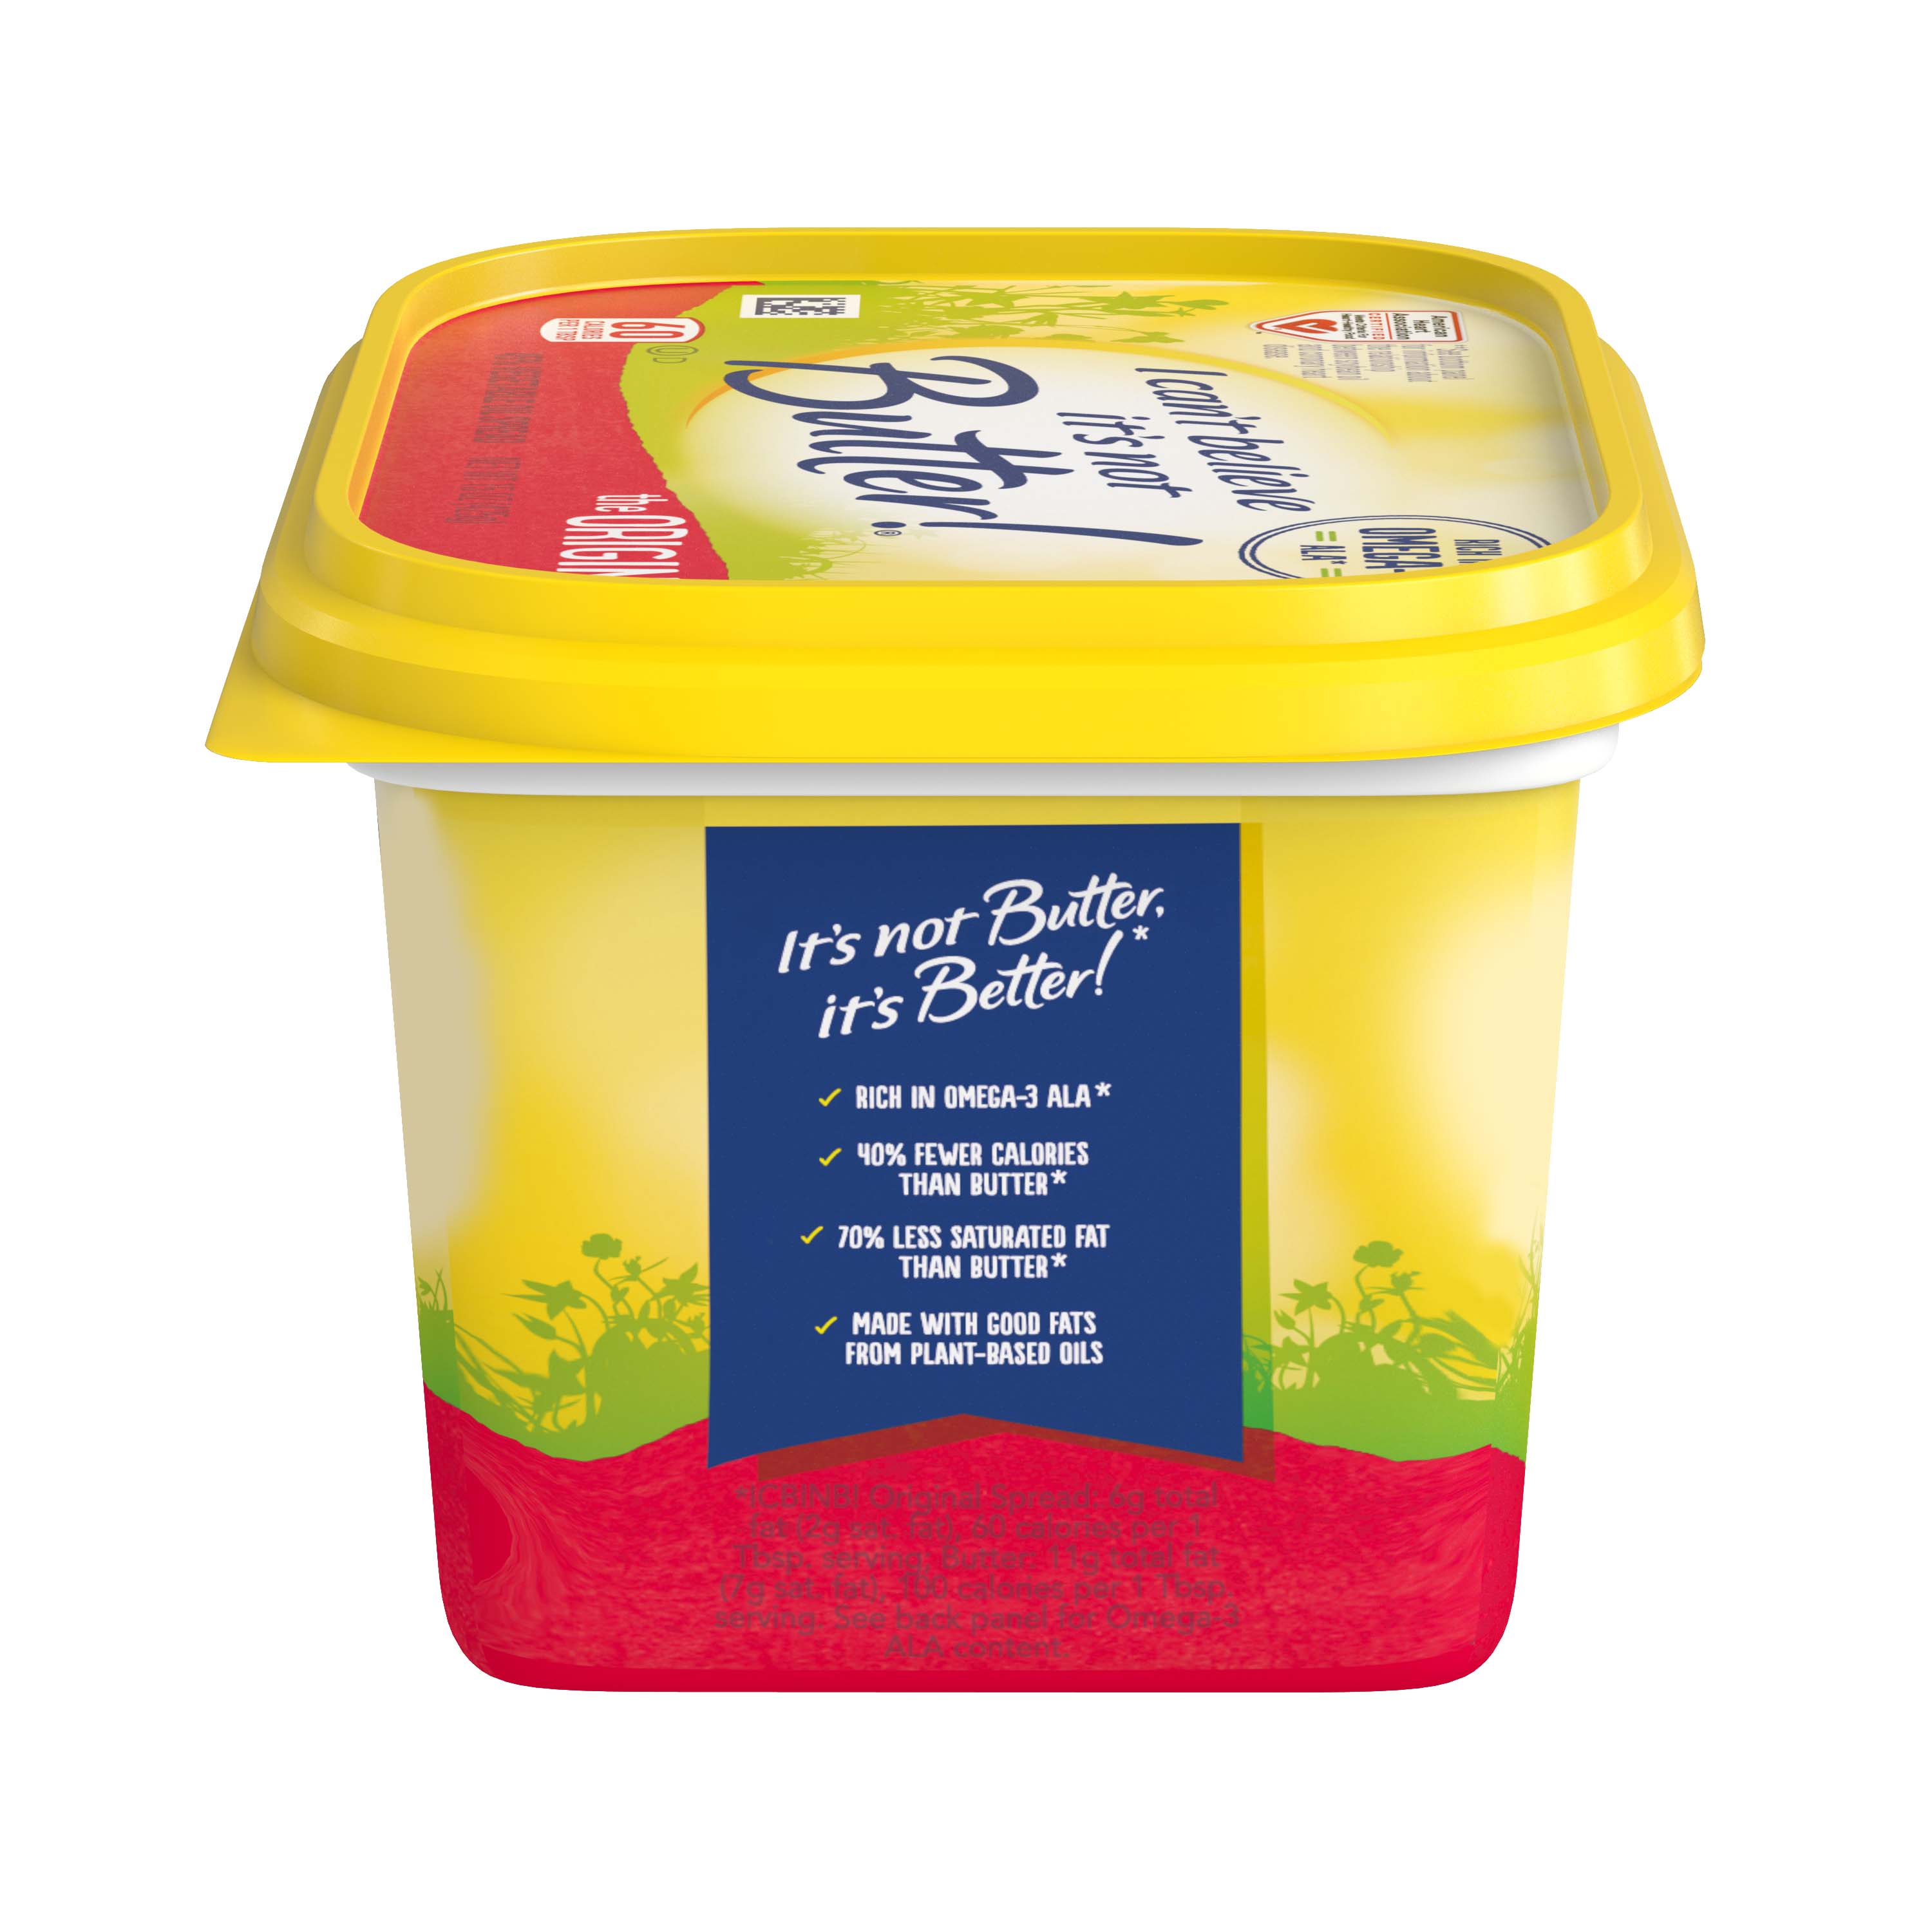 I Can't Believe It's Not Butter Original Spread, 15 oz Tub (Refrigerated) - image 5 of 9